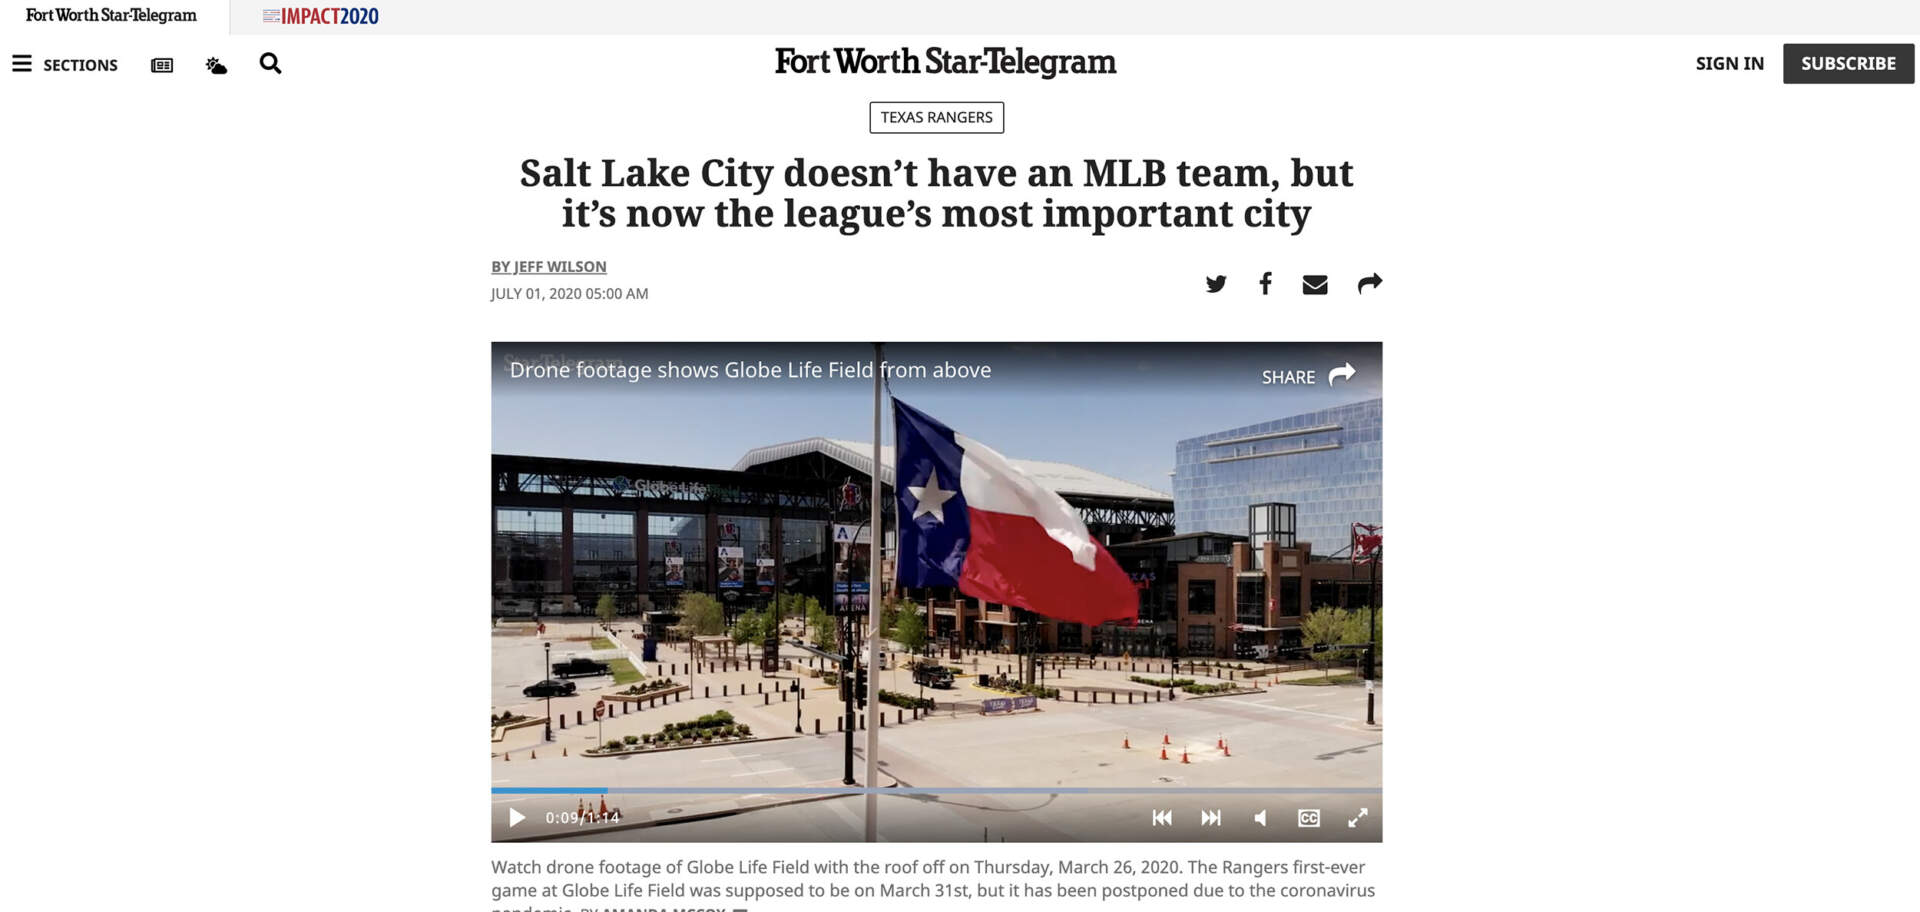 TEXAS RANGERS-Salt Lake City doesnt have an MLB team but its now the leagues most important cit